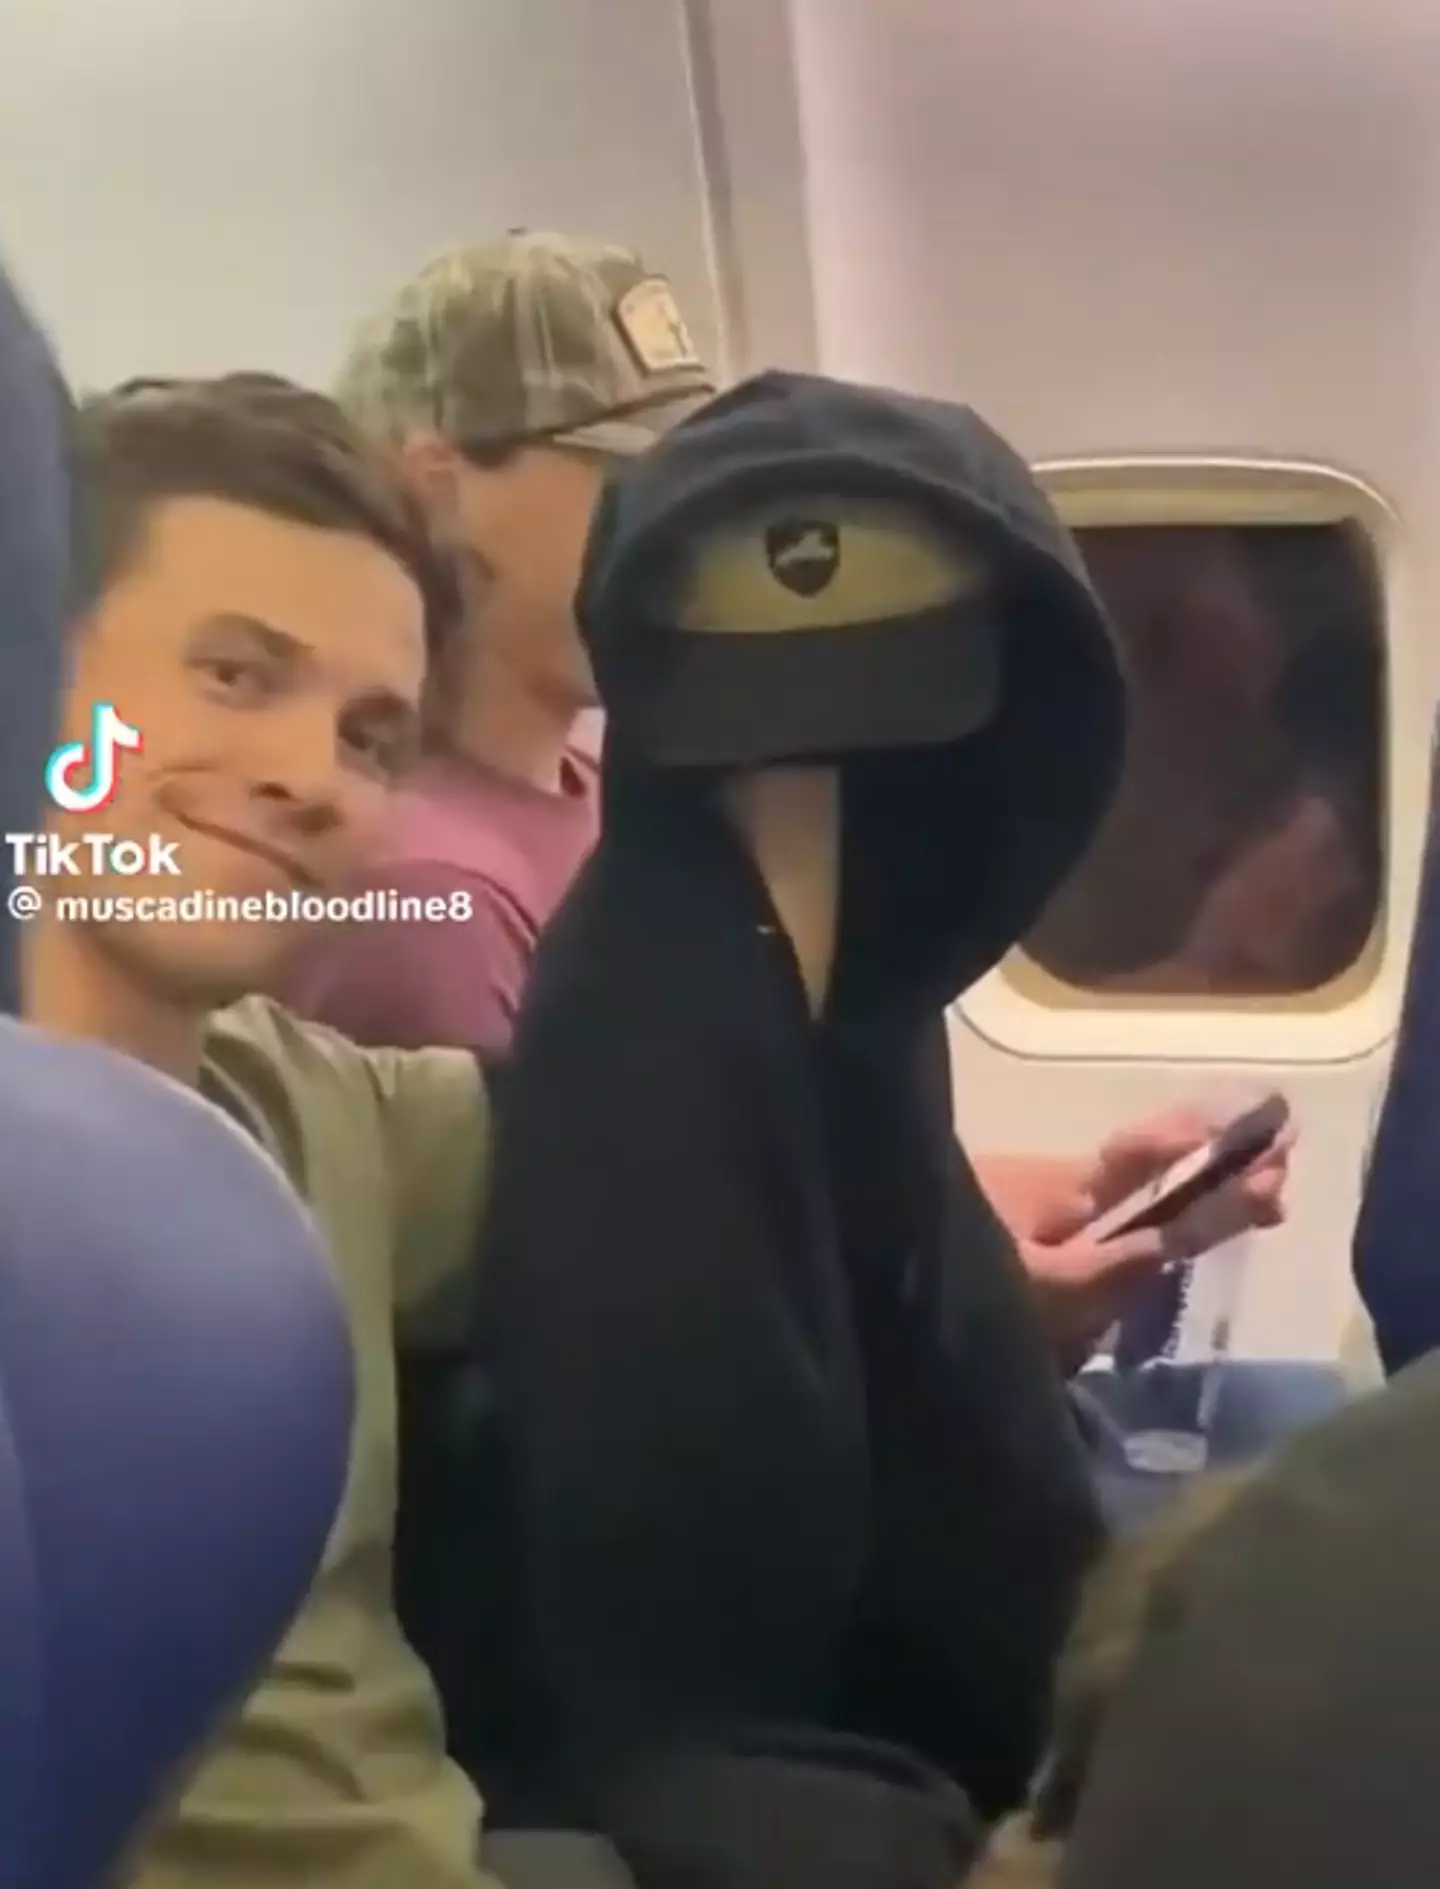 The man's 'hack' to stop other people sitting next to him.